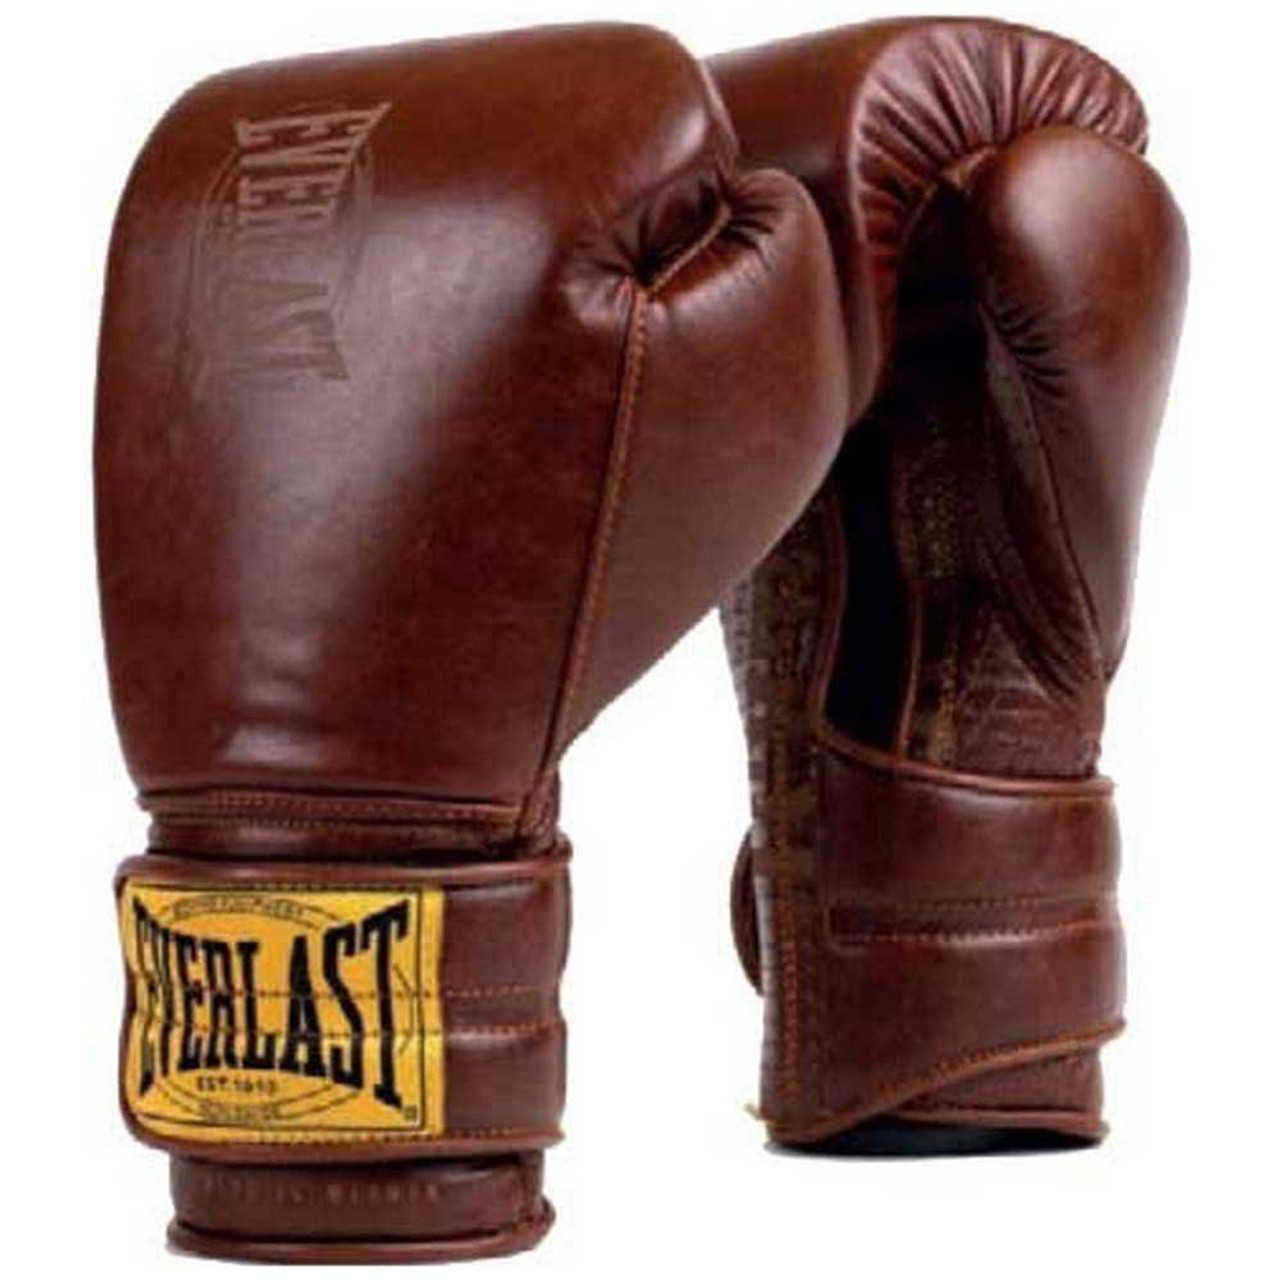 https://cdn11.bigcommerce.com/s-4hhc0ugv6e/images/stencil/1280x1280/products/1047/2675/everlast-1910-hook-loop-sparring-training-gloves__14531.1664574442.jpg?c=2